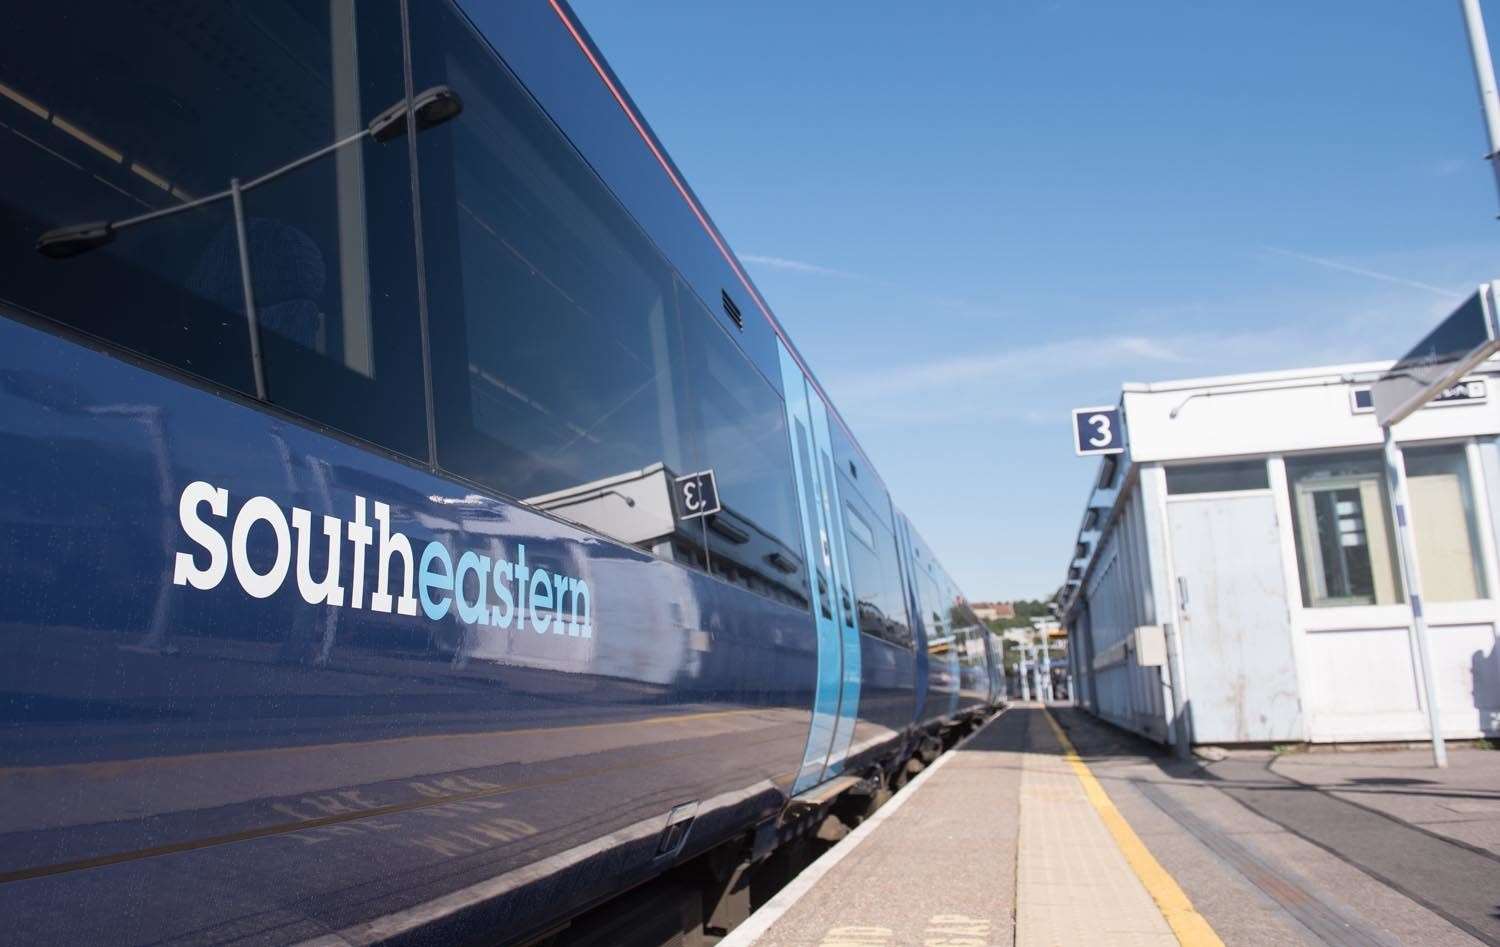 Southeastern boosts the number of seats from Monday on its services in and out of the county